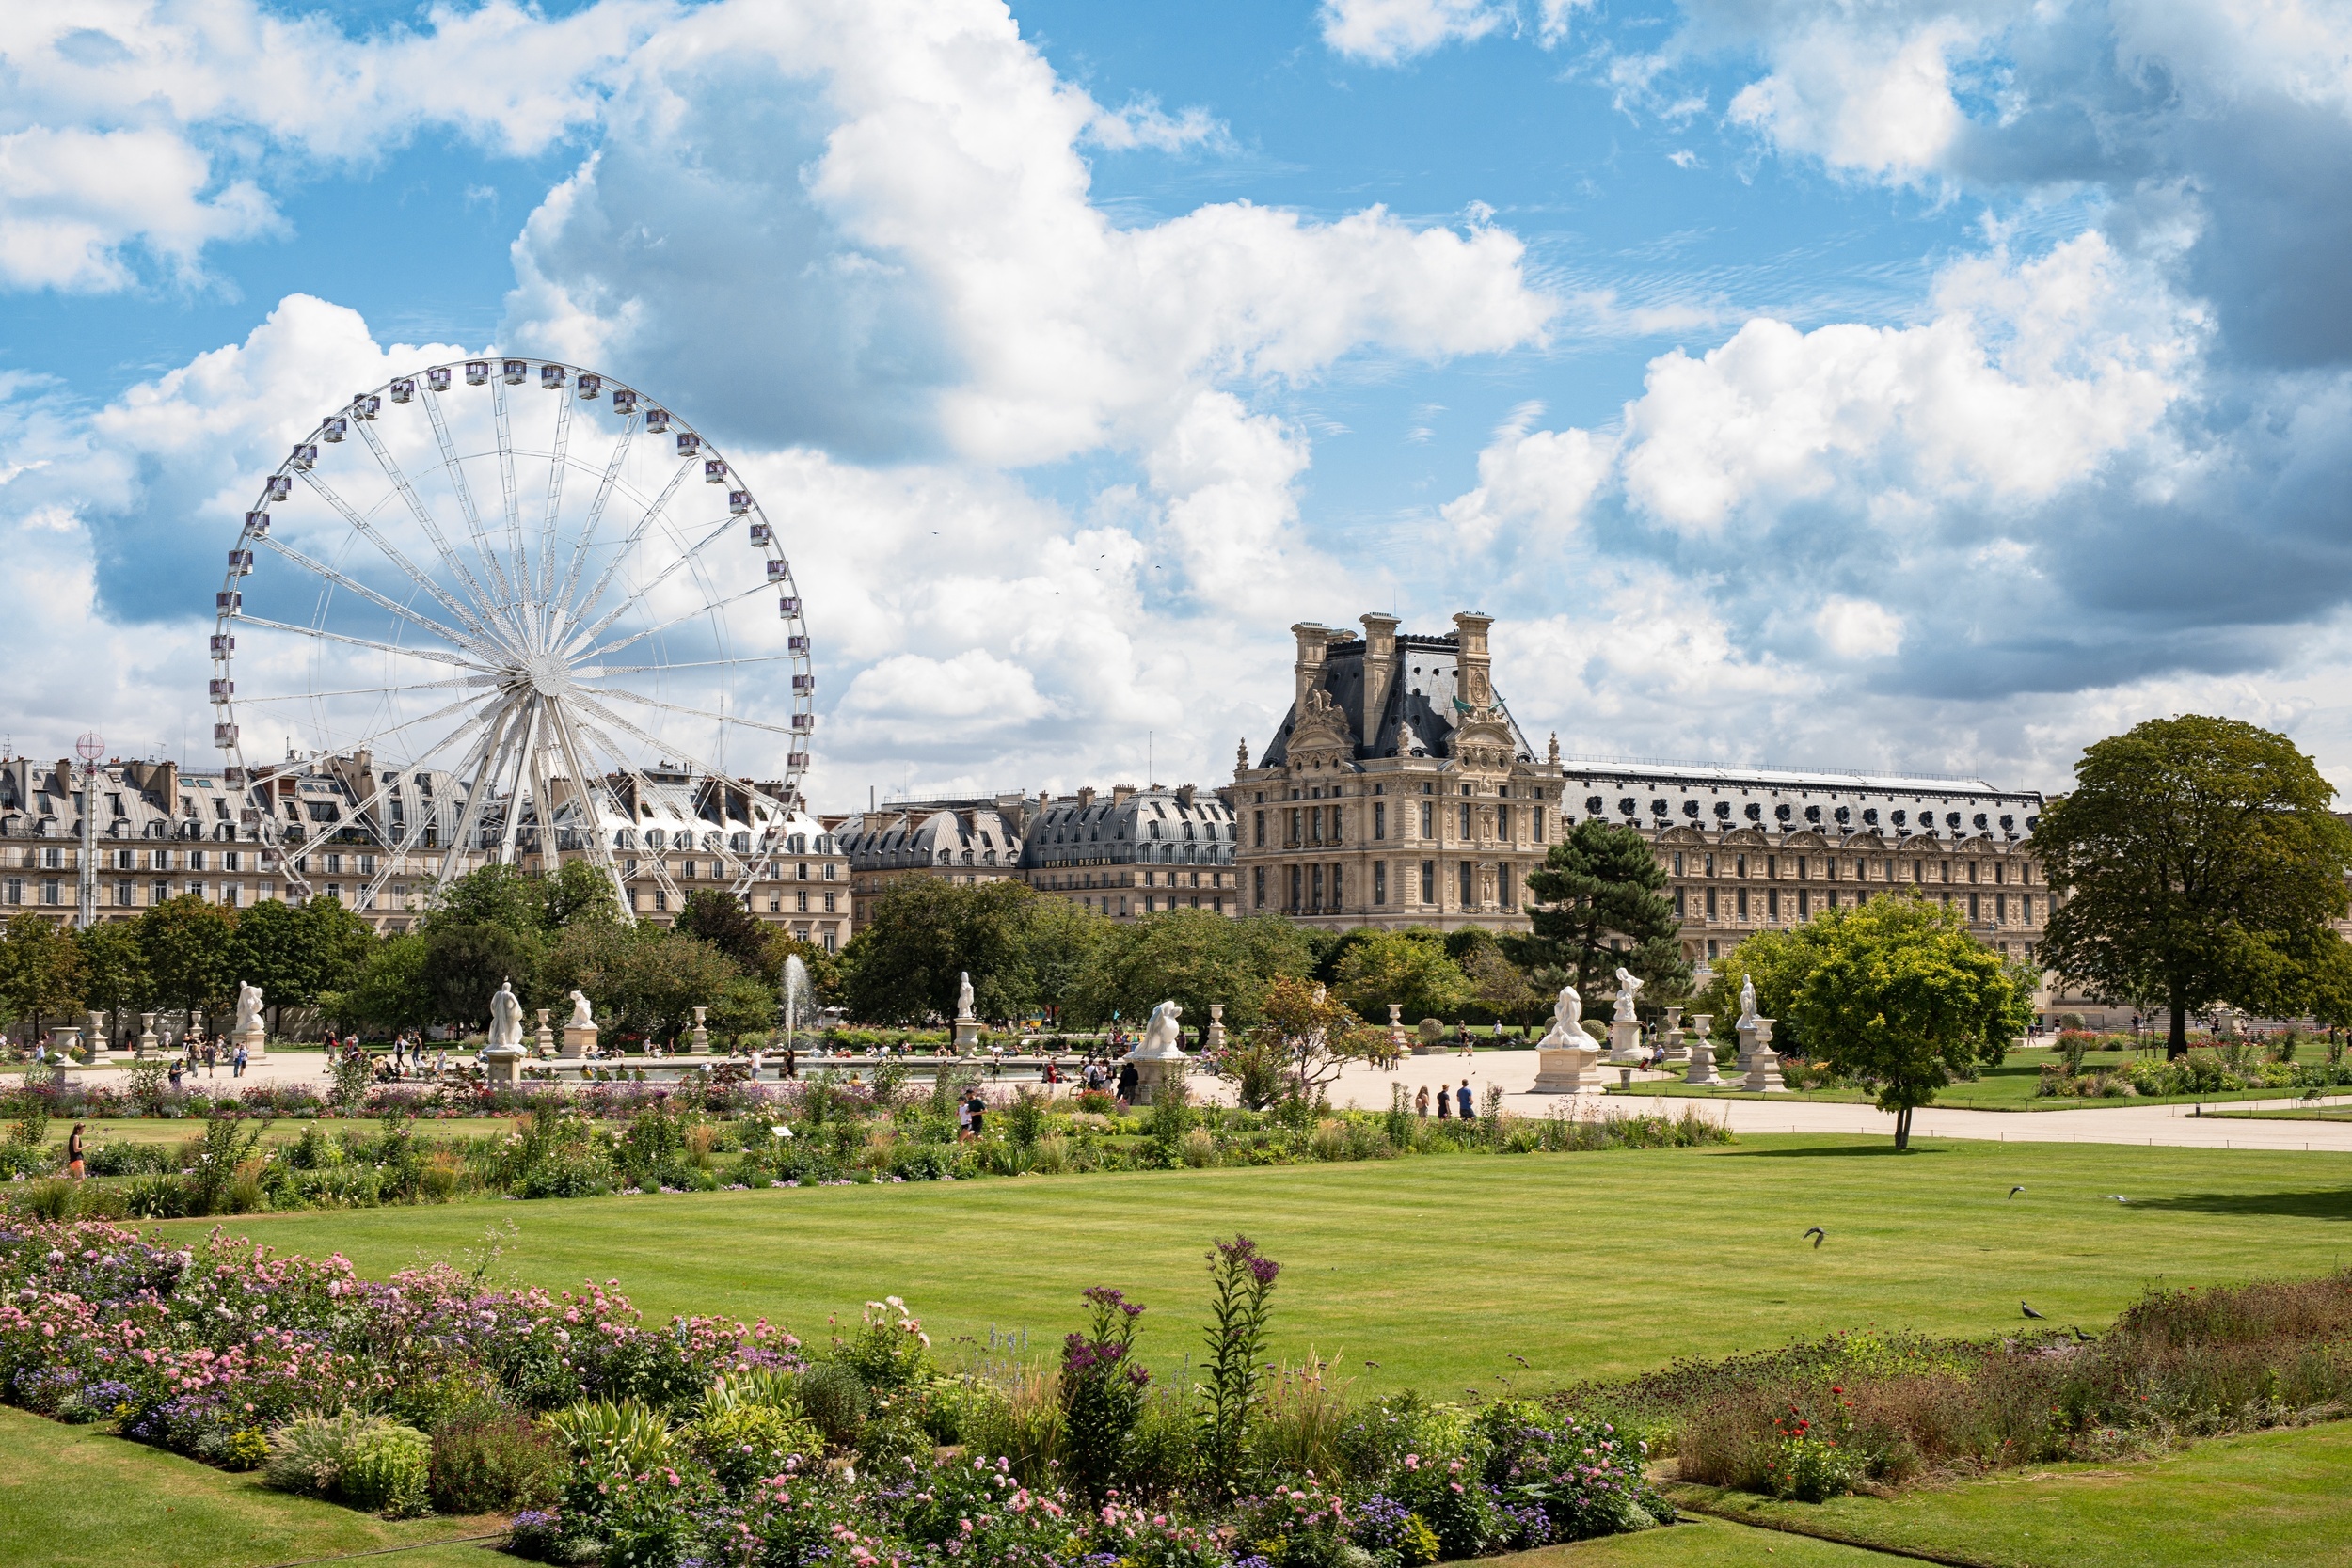 <p>These gardens can be found all over Instagram because they’re located just outside the Louvre. However, they’re not actually located in the museum, so we can include them in this list. It’s a great location to enjoy a sunny day in Paris or have a quick drink at one of the many outdoor brasseries.</p><p><a href='https://www.msn.com/en-us/community/channel/vid-cj9pqbr0vn9in2b6ddcd8sfgpfq6x6utp44fssrv6mc2gtybw0us'>Follow us on MSN to see more of our exclusive lifestyle content.</a></p>